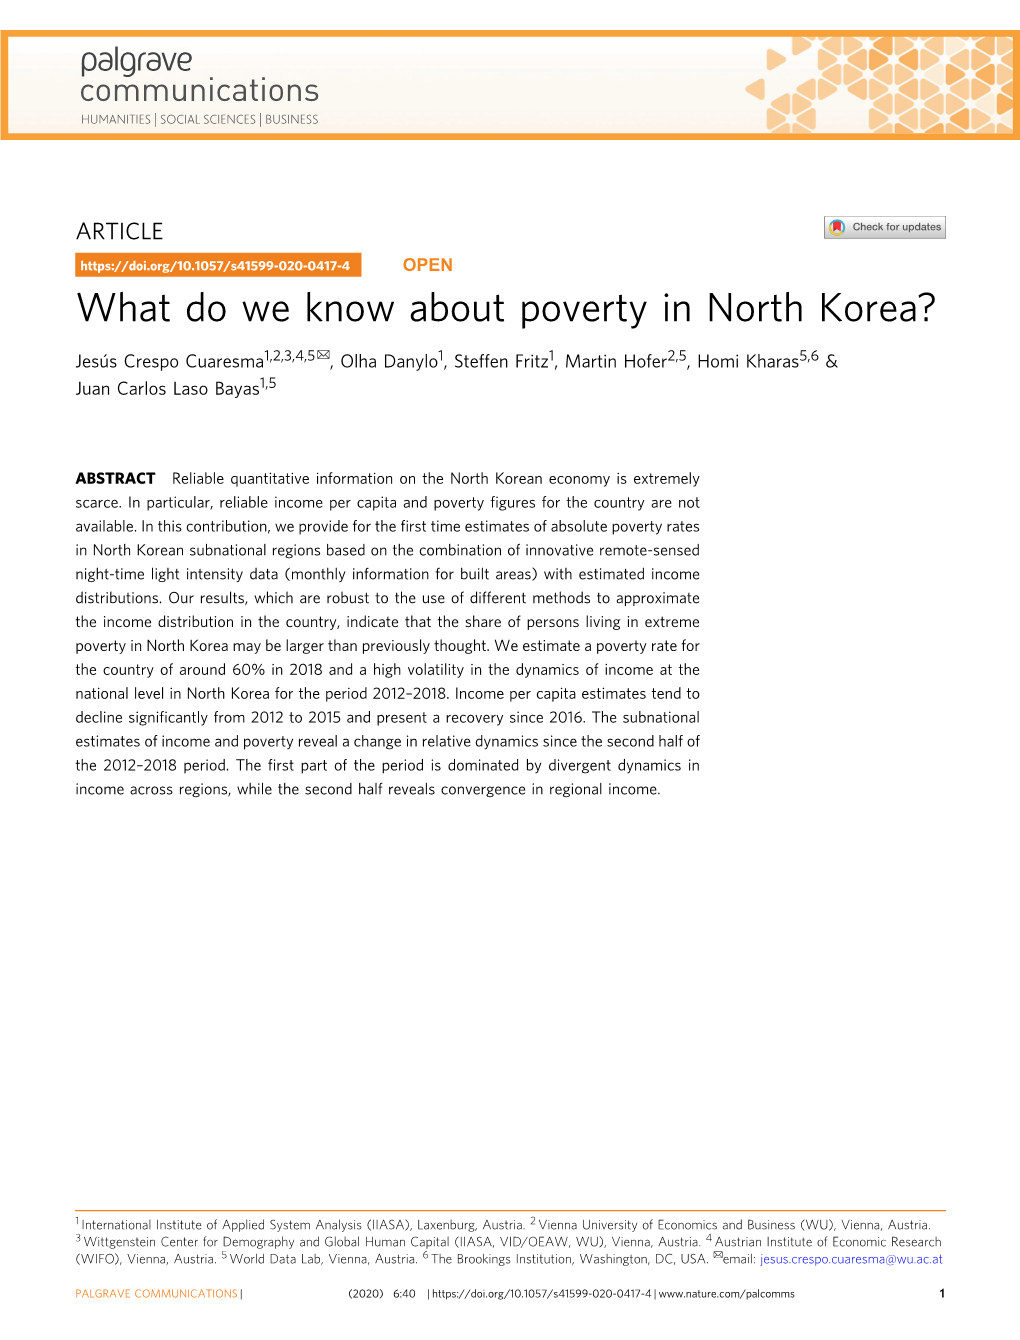 What Do We Know About Poverty in North Korea?